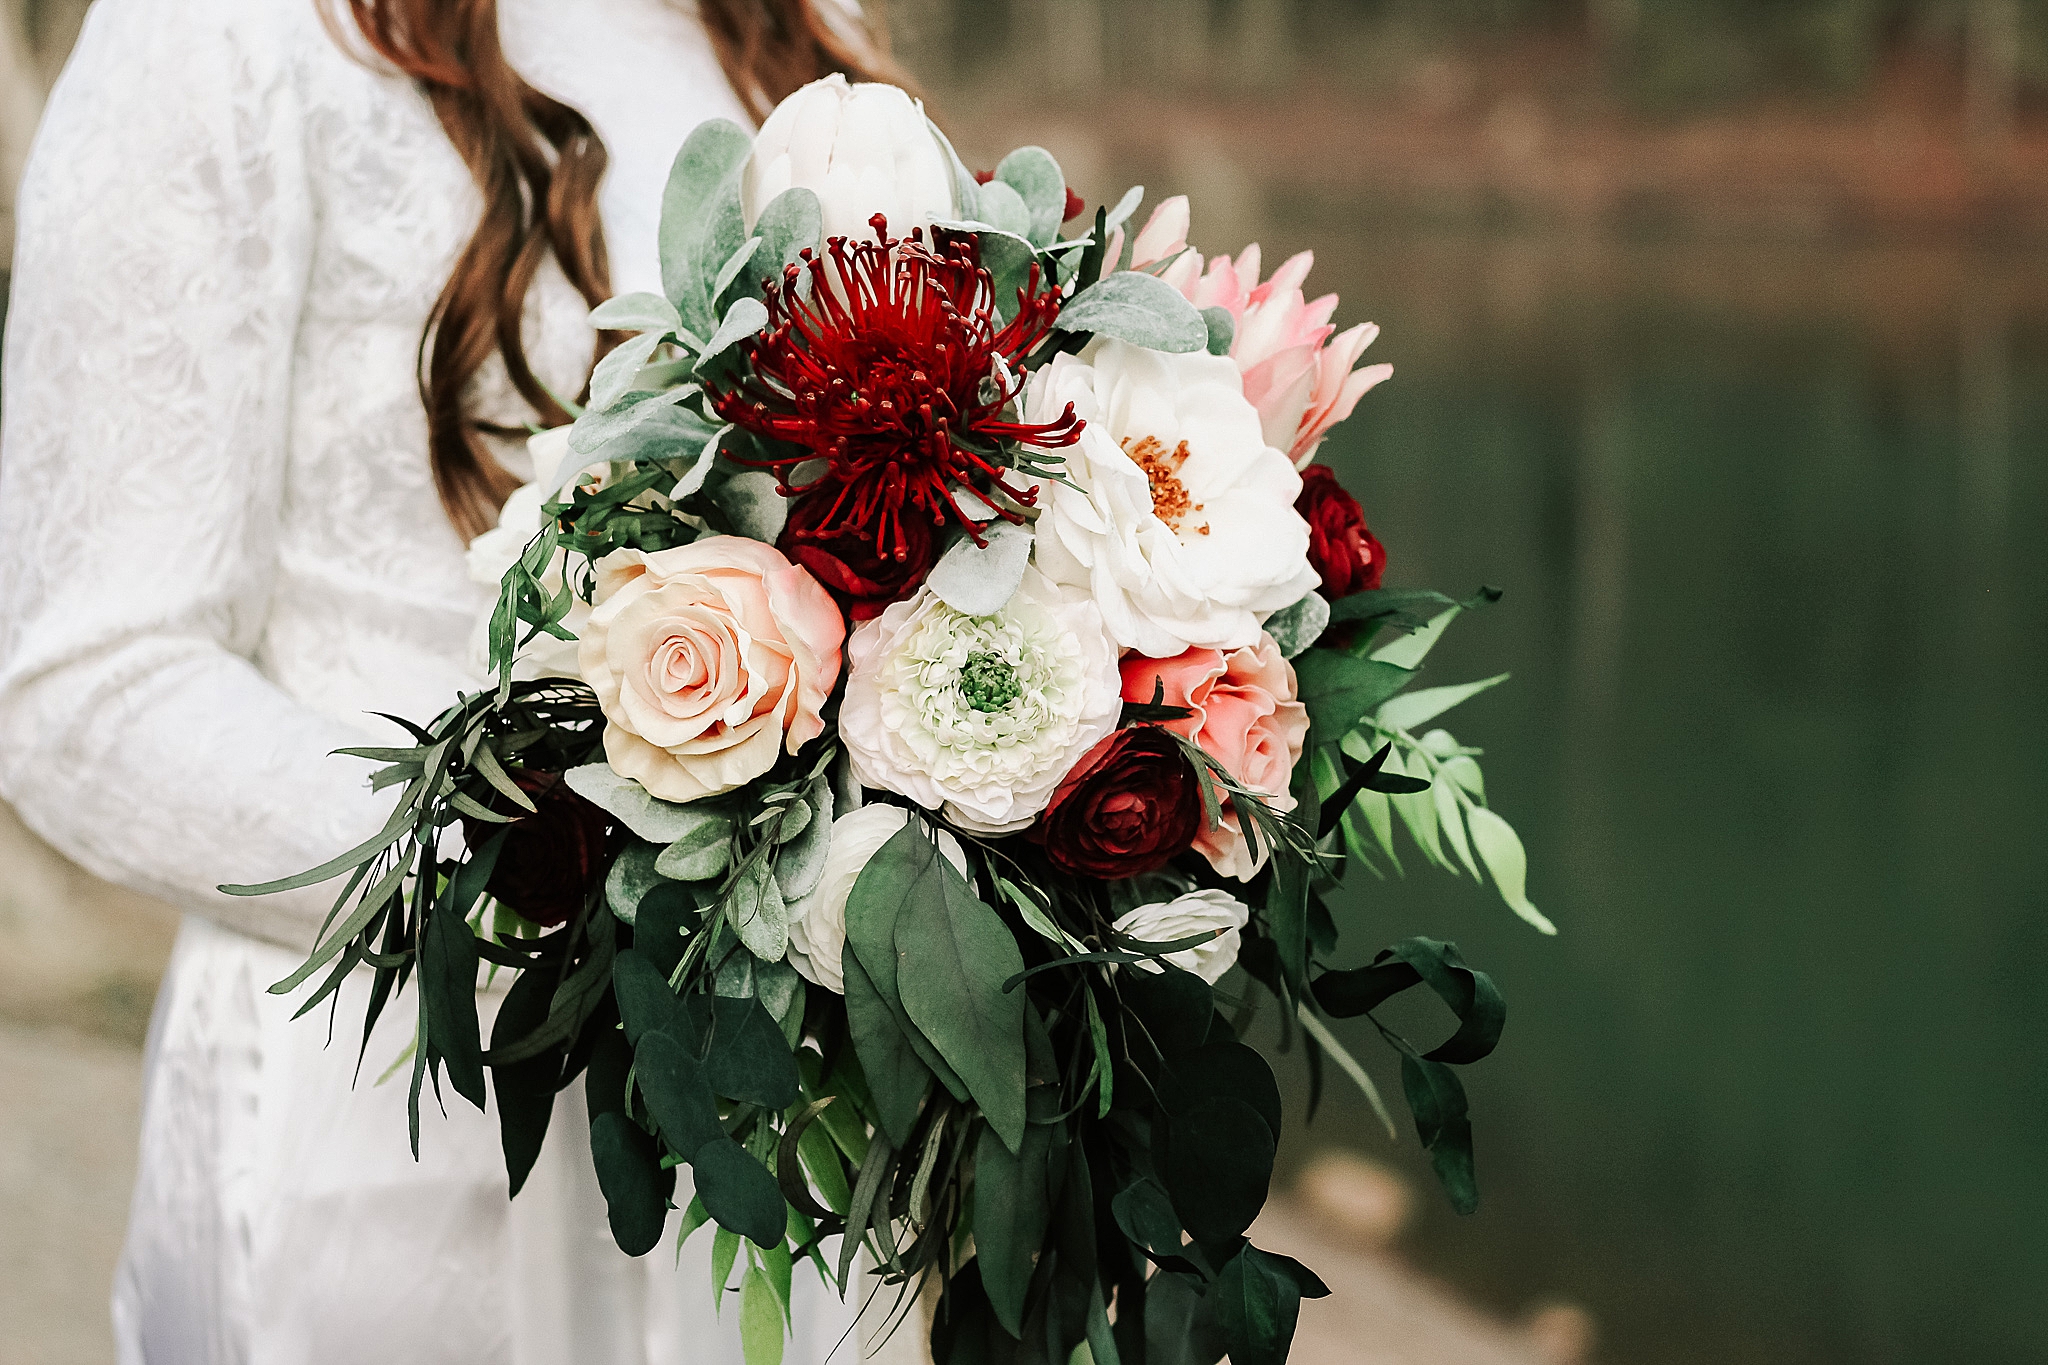 bride bouquet at a timber moose lodge wedding by adrian wayment photo